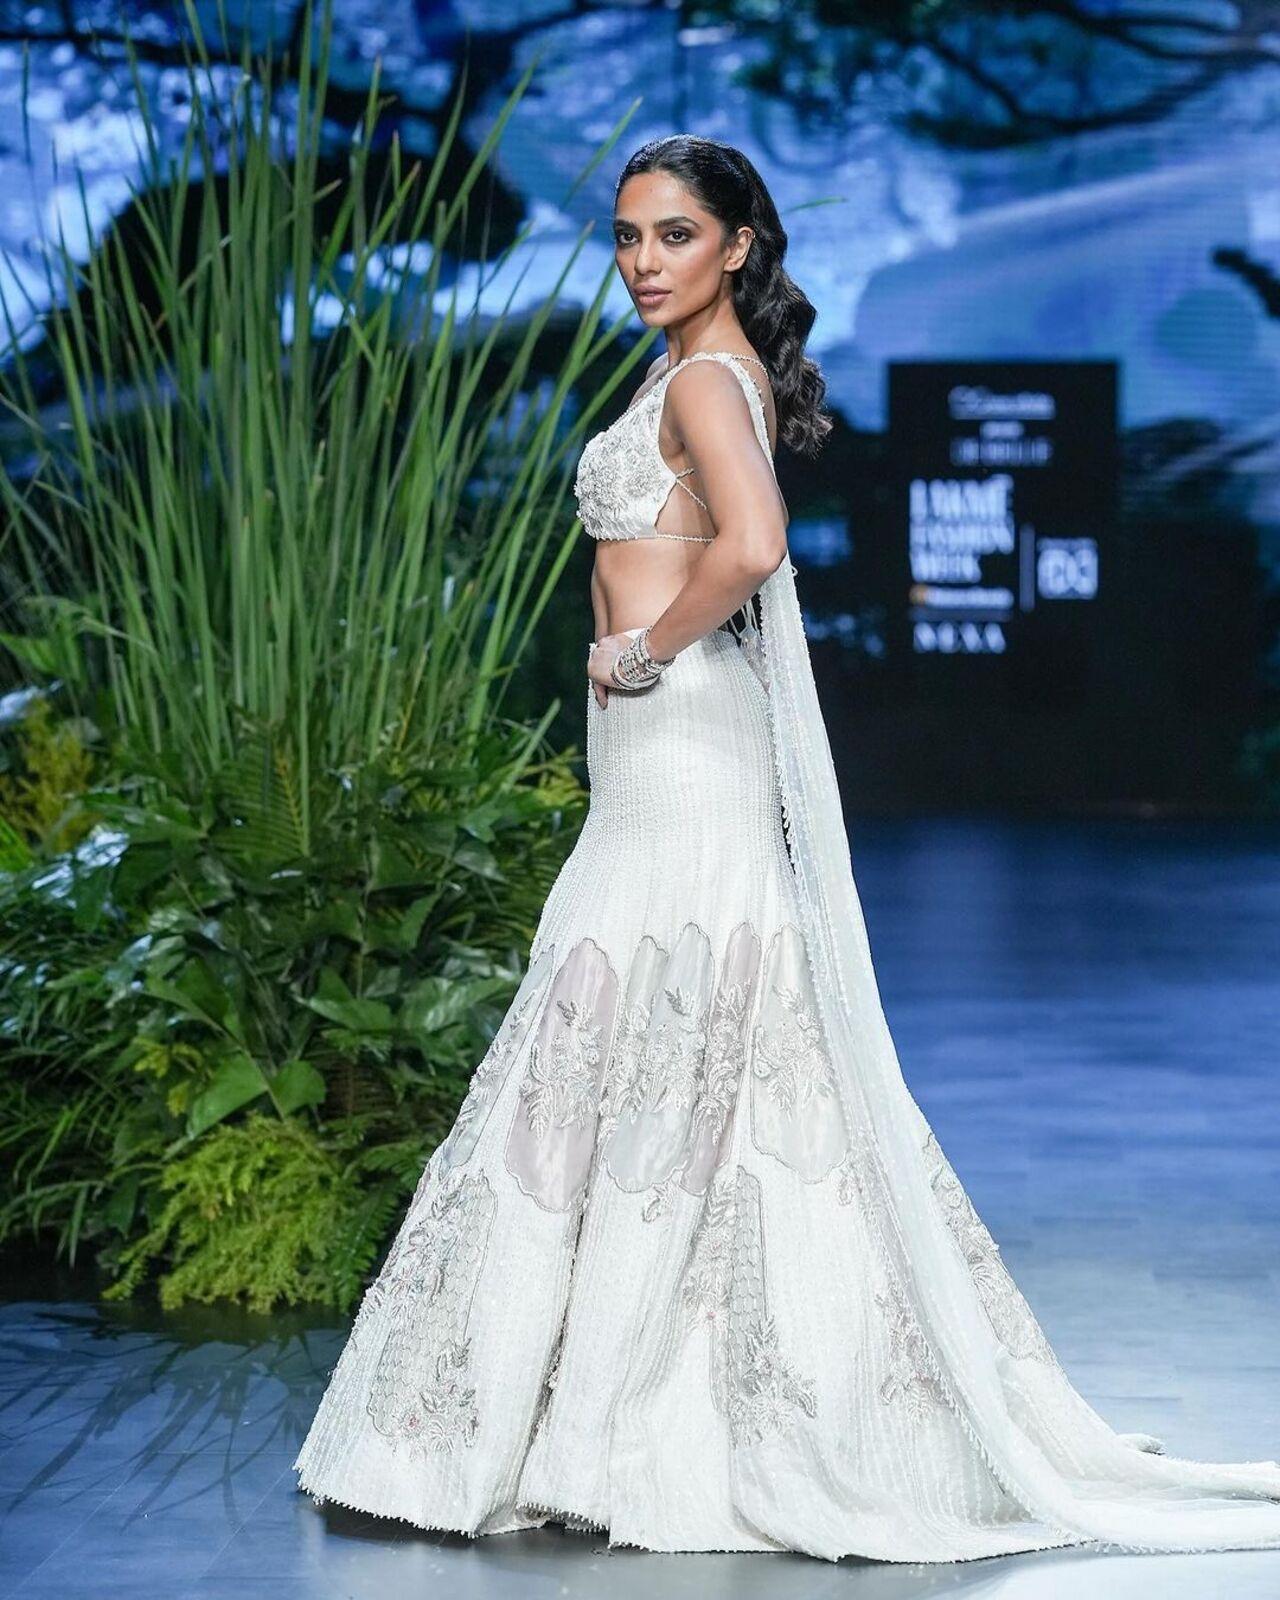 Sobhita Dhulipala looked like a dream in this flowy white dress